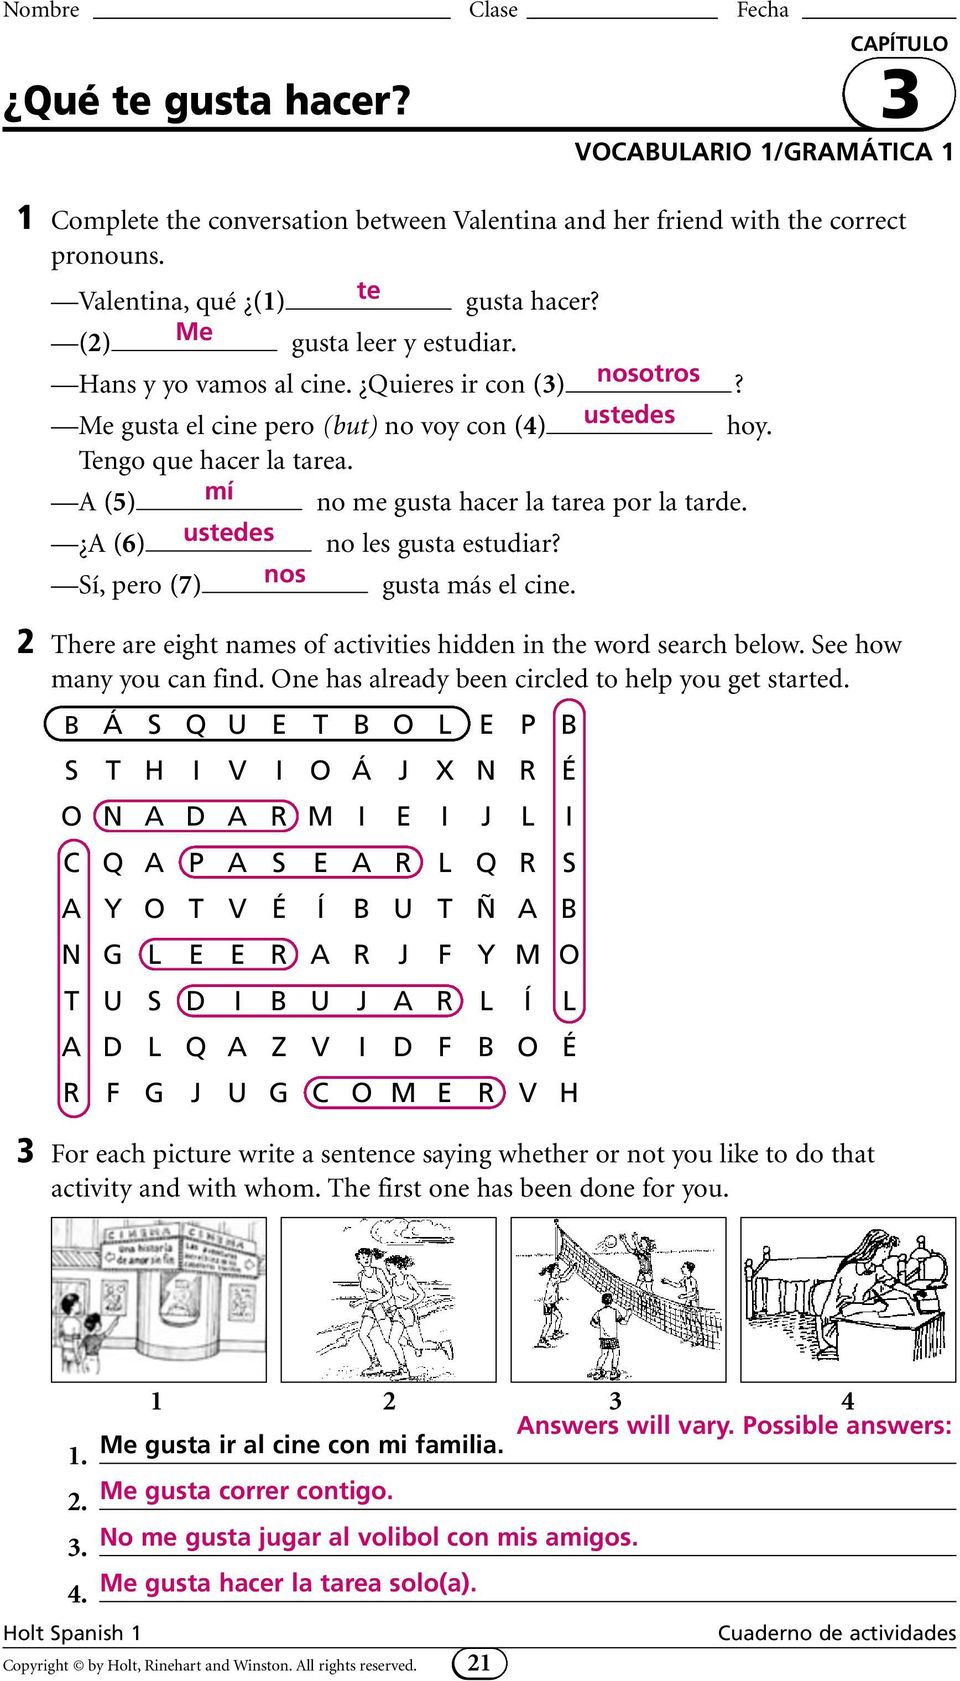 Sí, pero (7) nos gusta más el cine. 2 There are eight names of activities hidden in the word search below. See how many you can find. One has already been circled to help you get started.